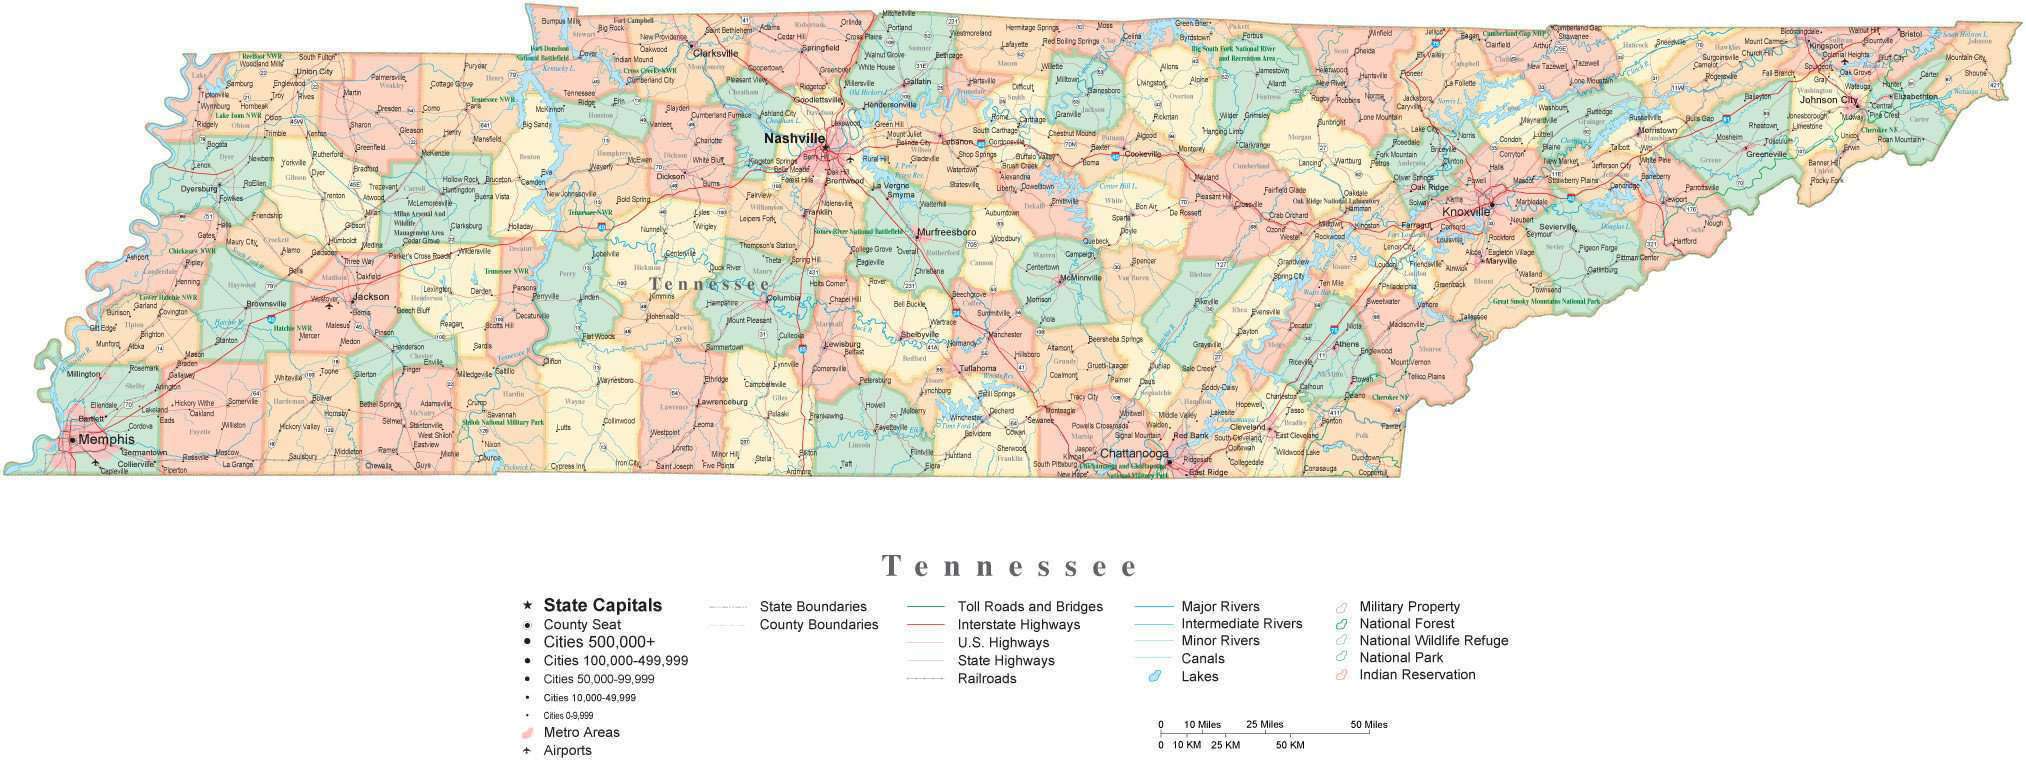 printable-map-of-tennessee-counties-and-cities